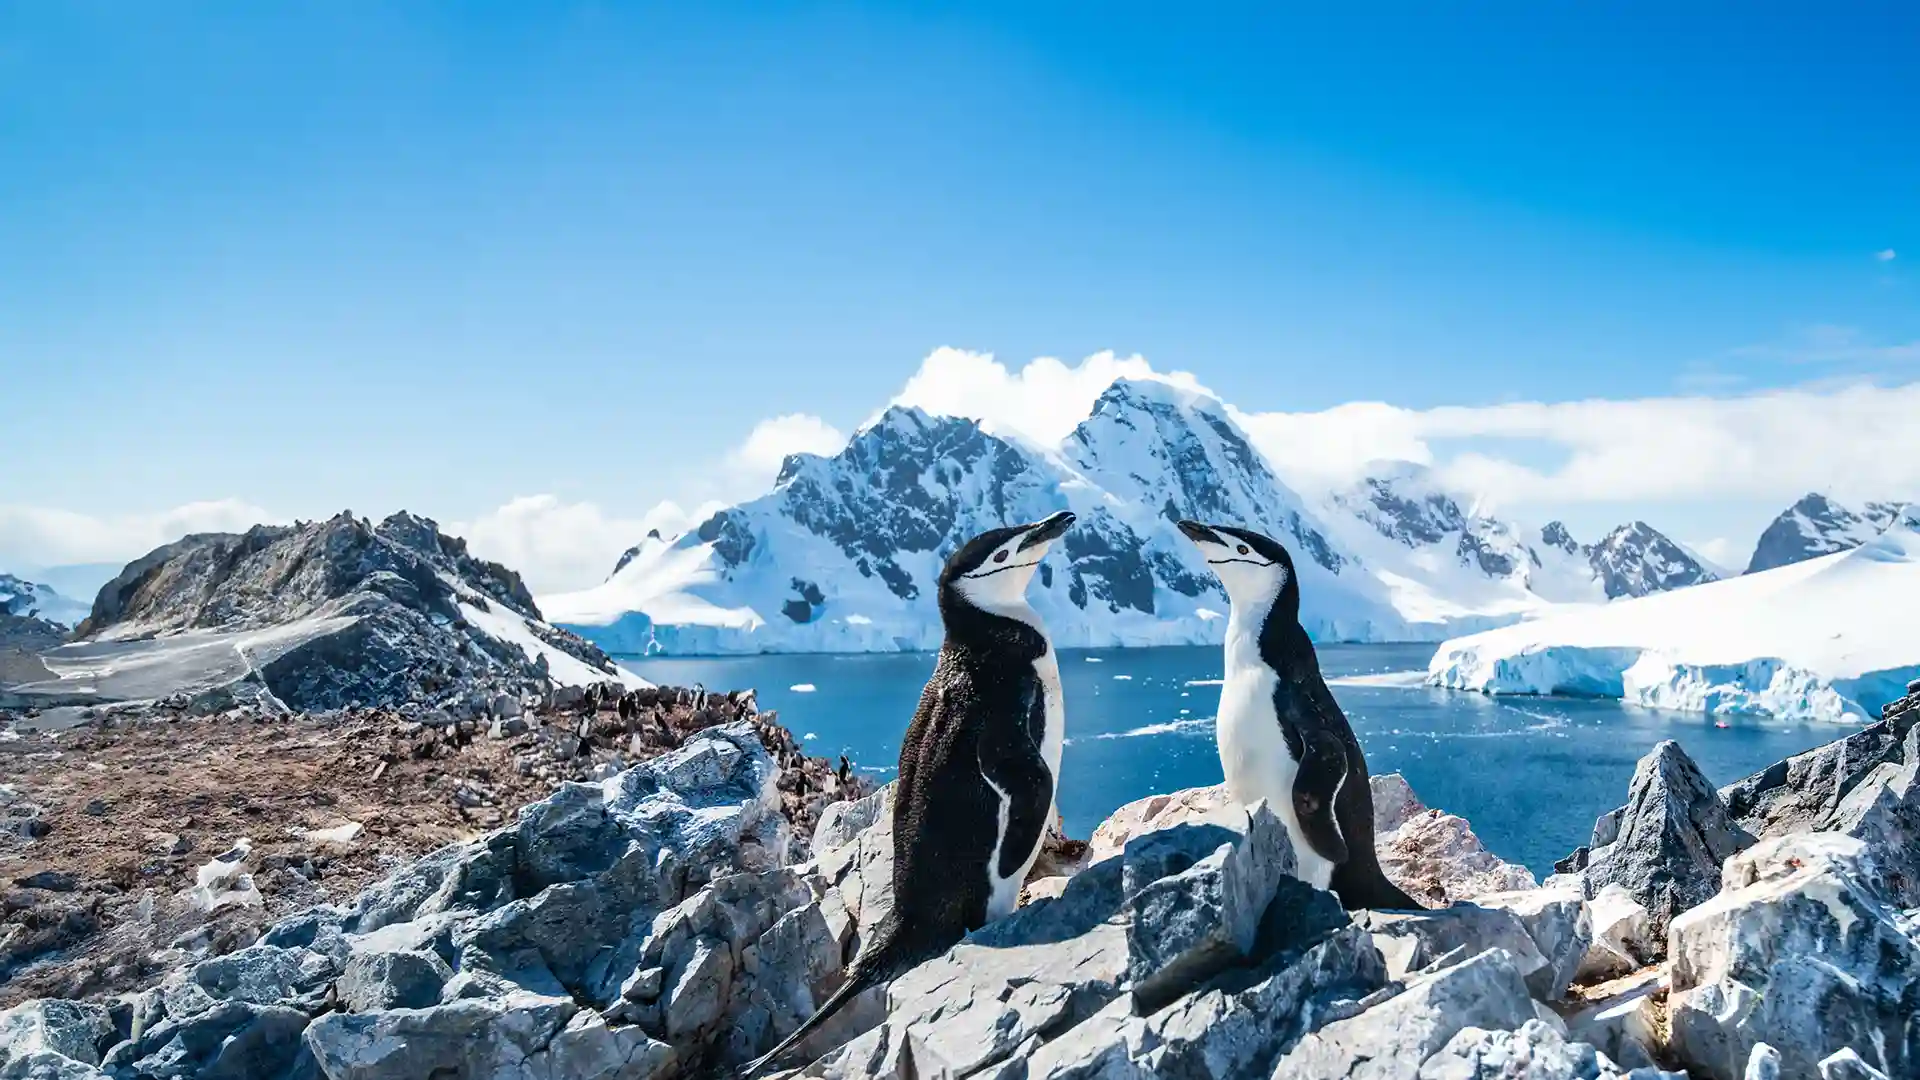 Penguins resting on icy landscape in Antarctica, surrounded by blue water and sky.